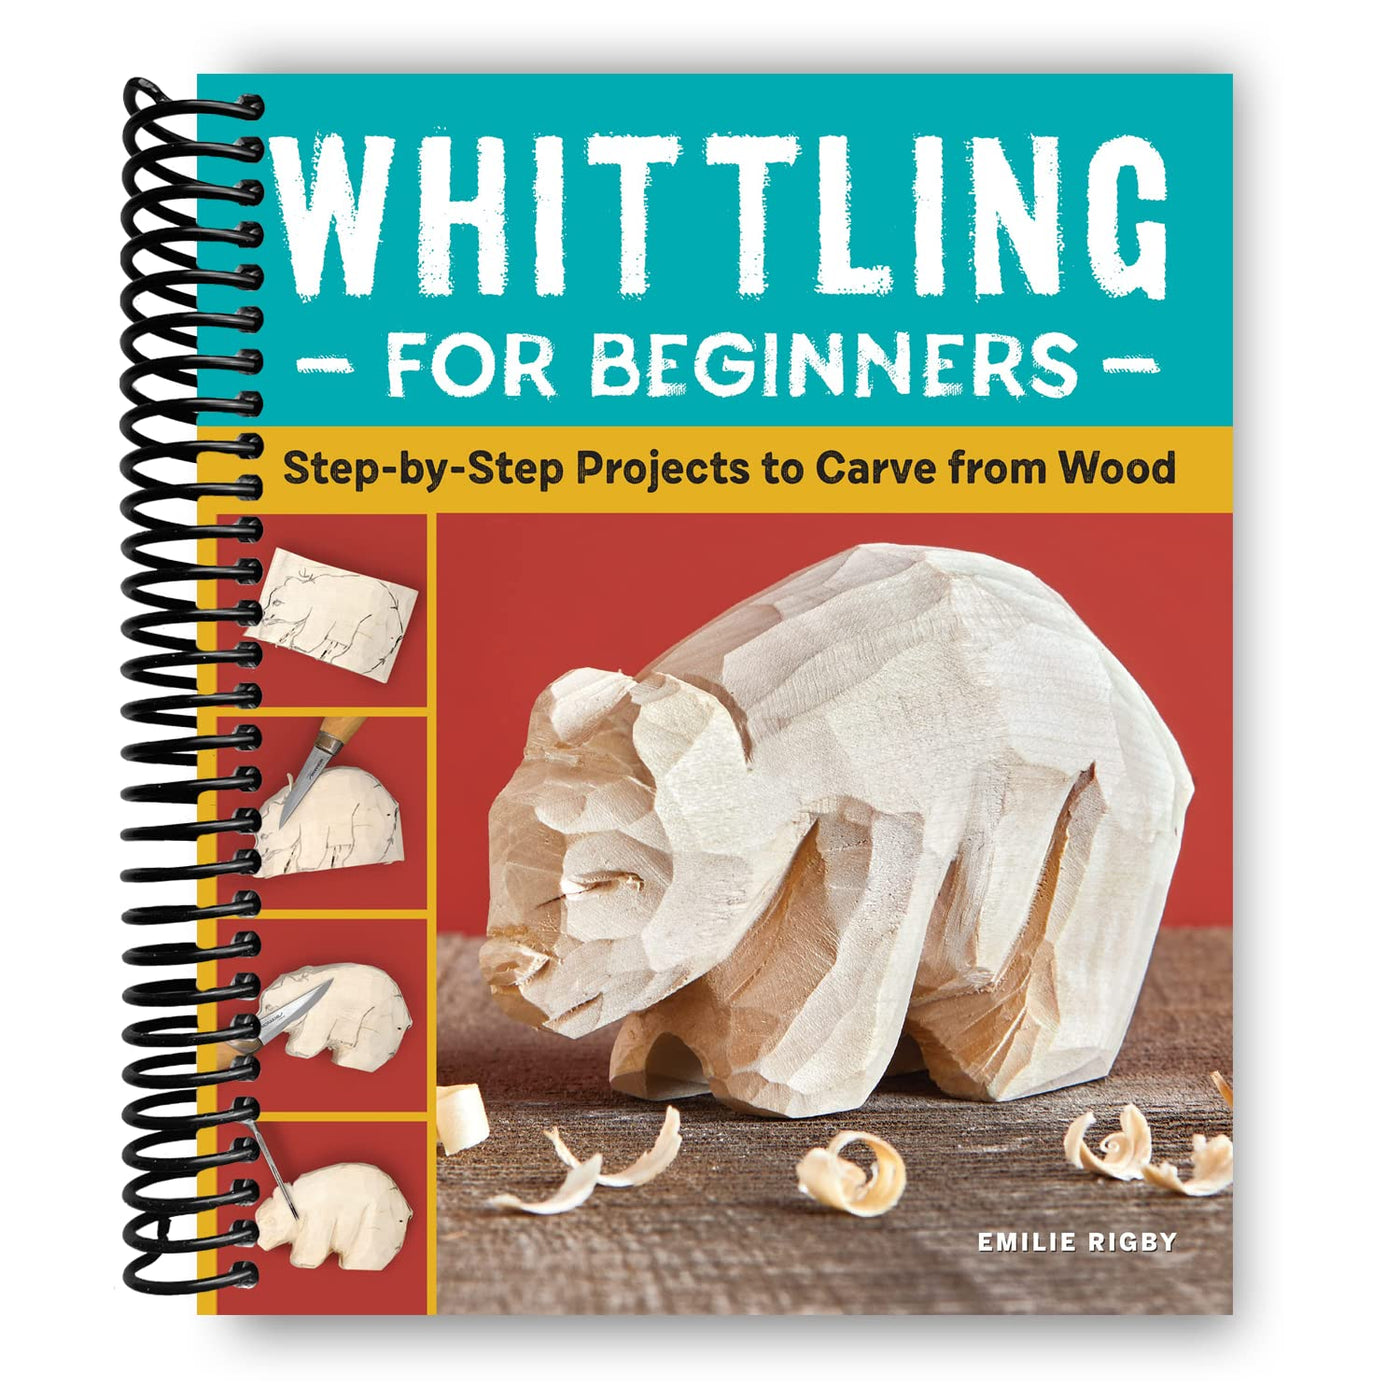 Whittling for Beginners: Step-by-Step Projects to Carve from Wood (Spiral Bound)